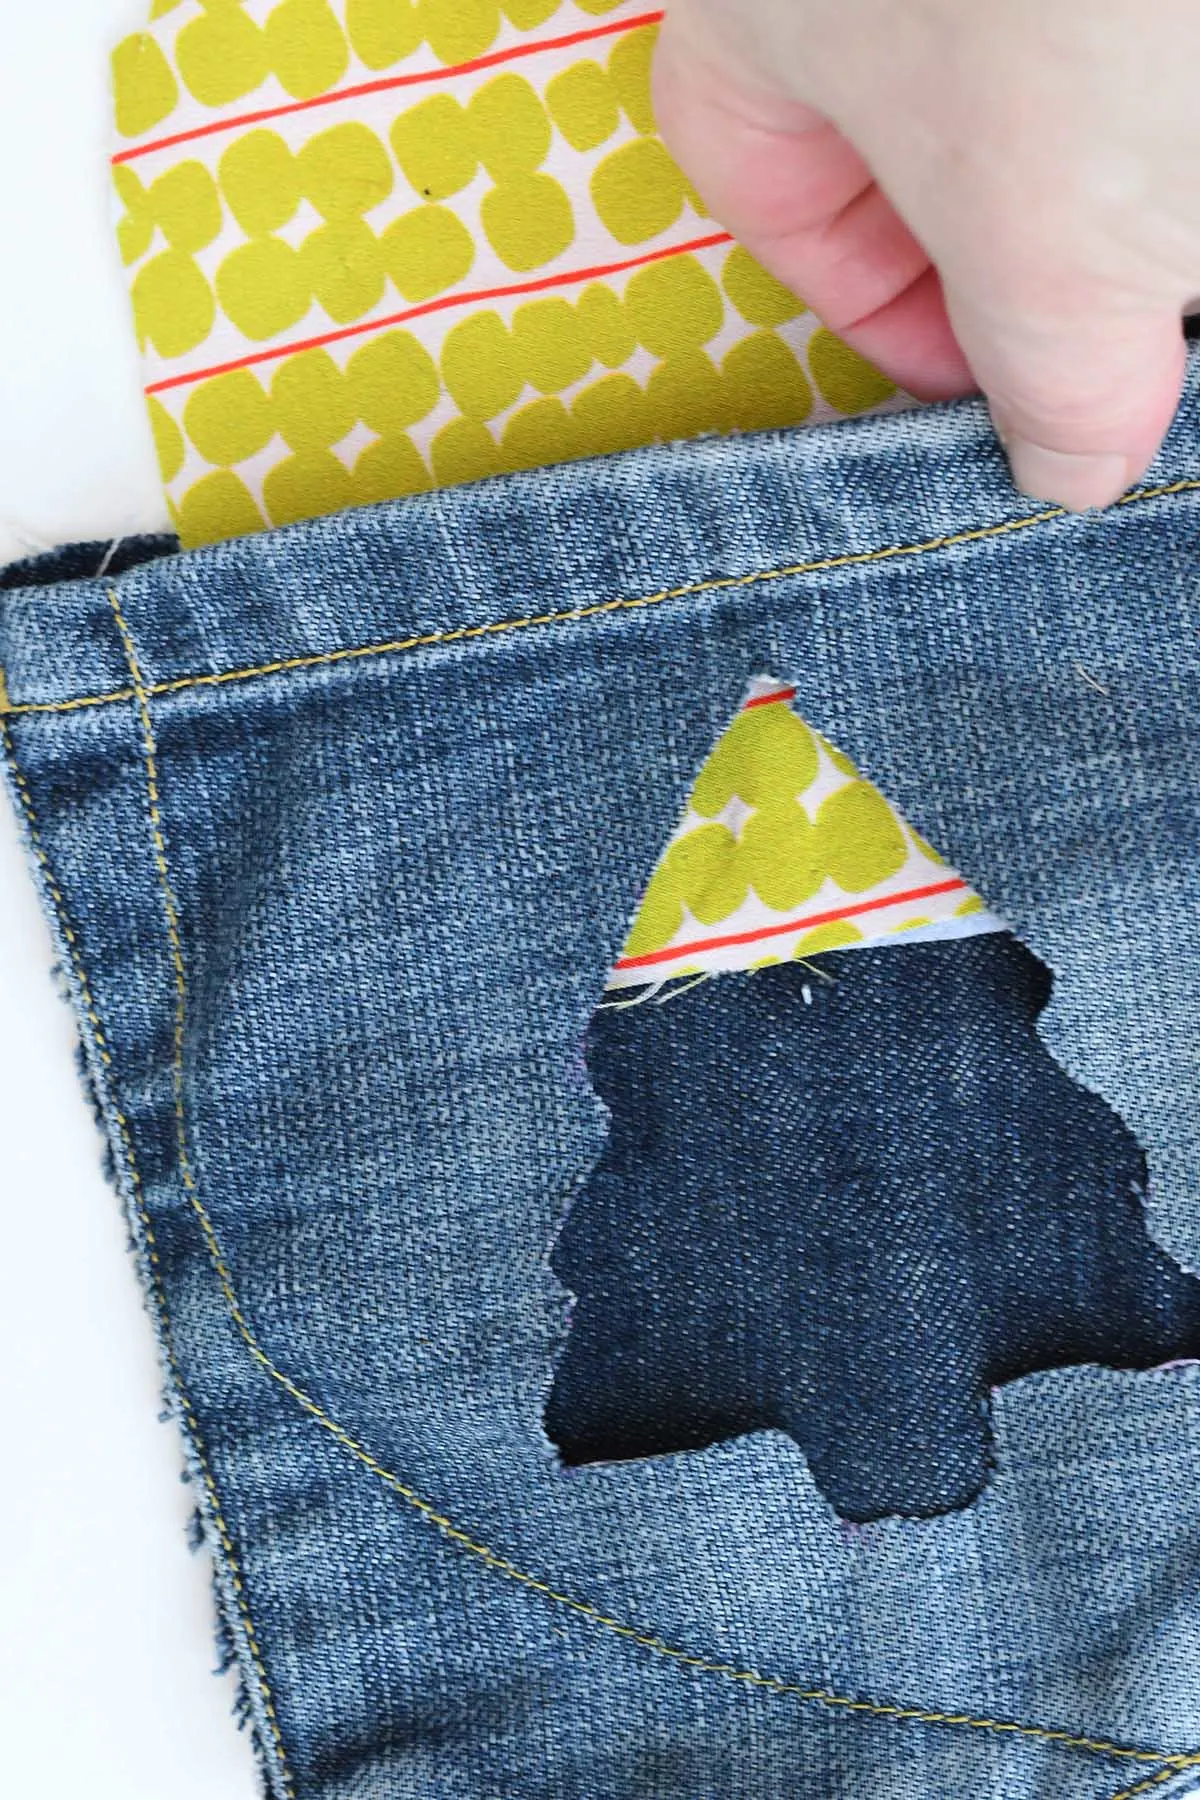 Putting fabric behind hole in jeans pocket